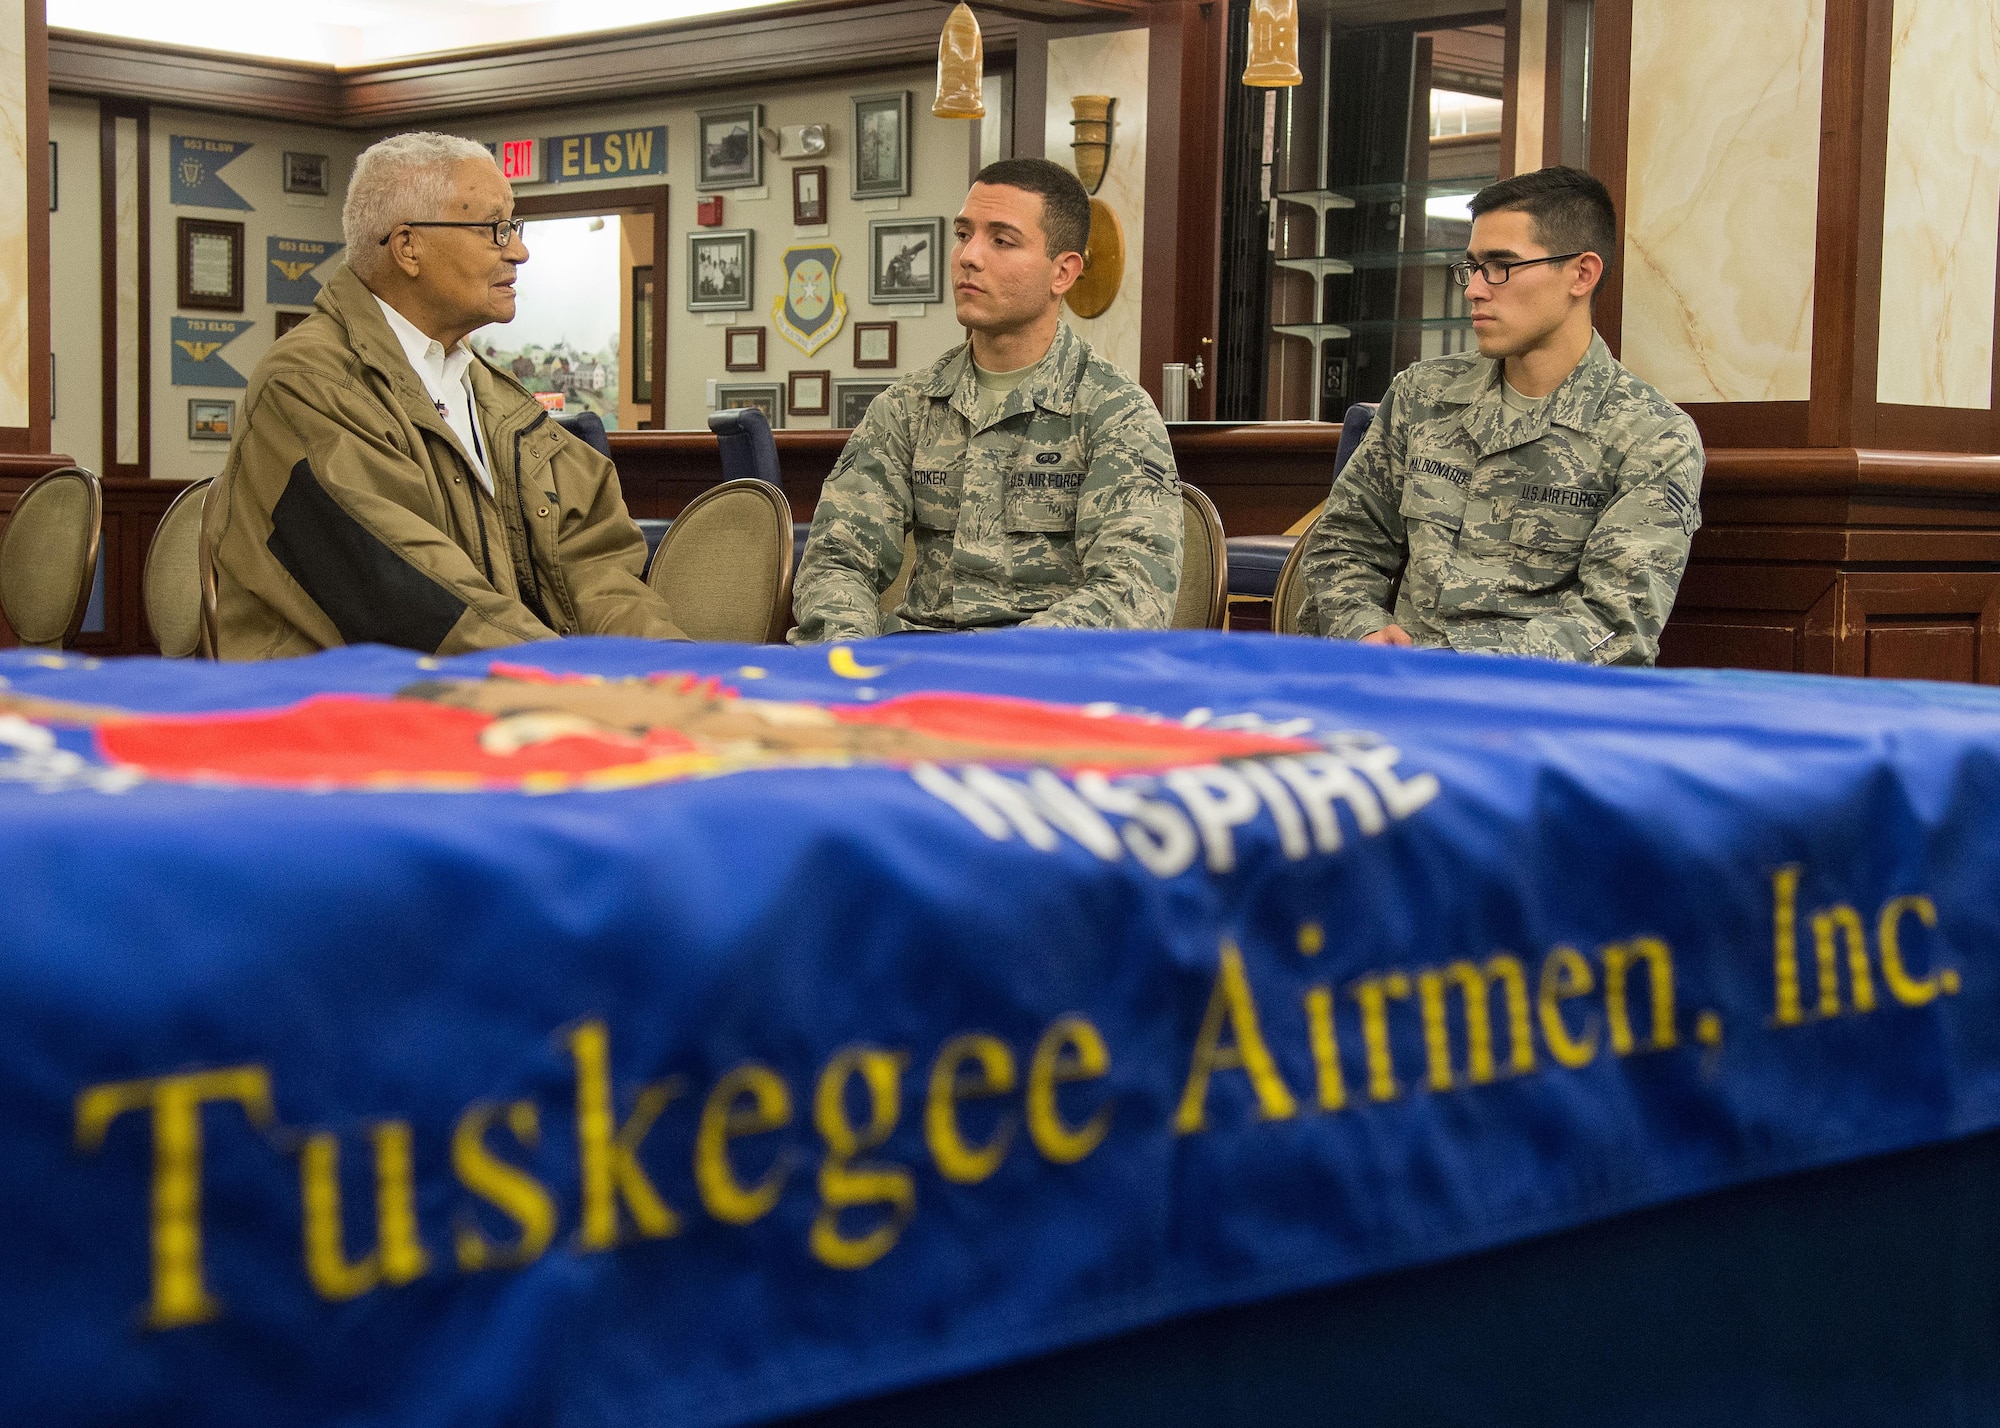 Retired Col. Charles E. McGee, an original Tuskegee Airman, speaks with Senior Airman Alfredo Maldonado, right, and Airman 1st Class Quinton Coke, both personnelist with the 66th Force Support Squadron, during a visit to Hanscom Air Force Base, Mass., Oct. 27. McGee met with Airmen prior to speaking at an event in Boston co-hosted by the New England Tuskegee Airmen Chapter and the local chapter bearing his name. (U.S. Air Force photo by Mark Herlihy)   